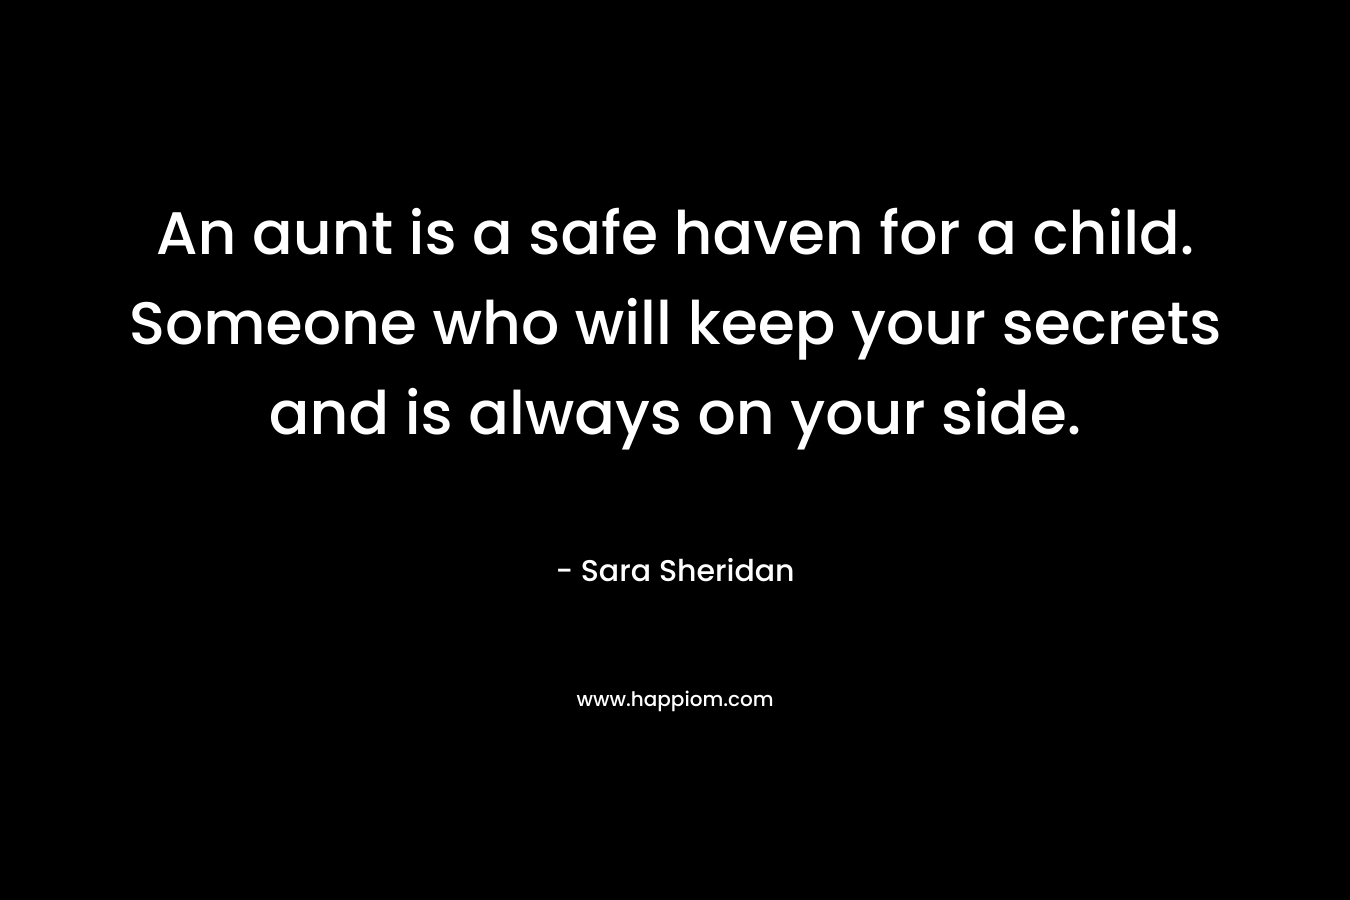 An aunt is a safe haven for a child. Someone who will keep your secrets and is always on your side. – Sara Sheridan